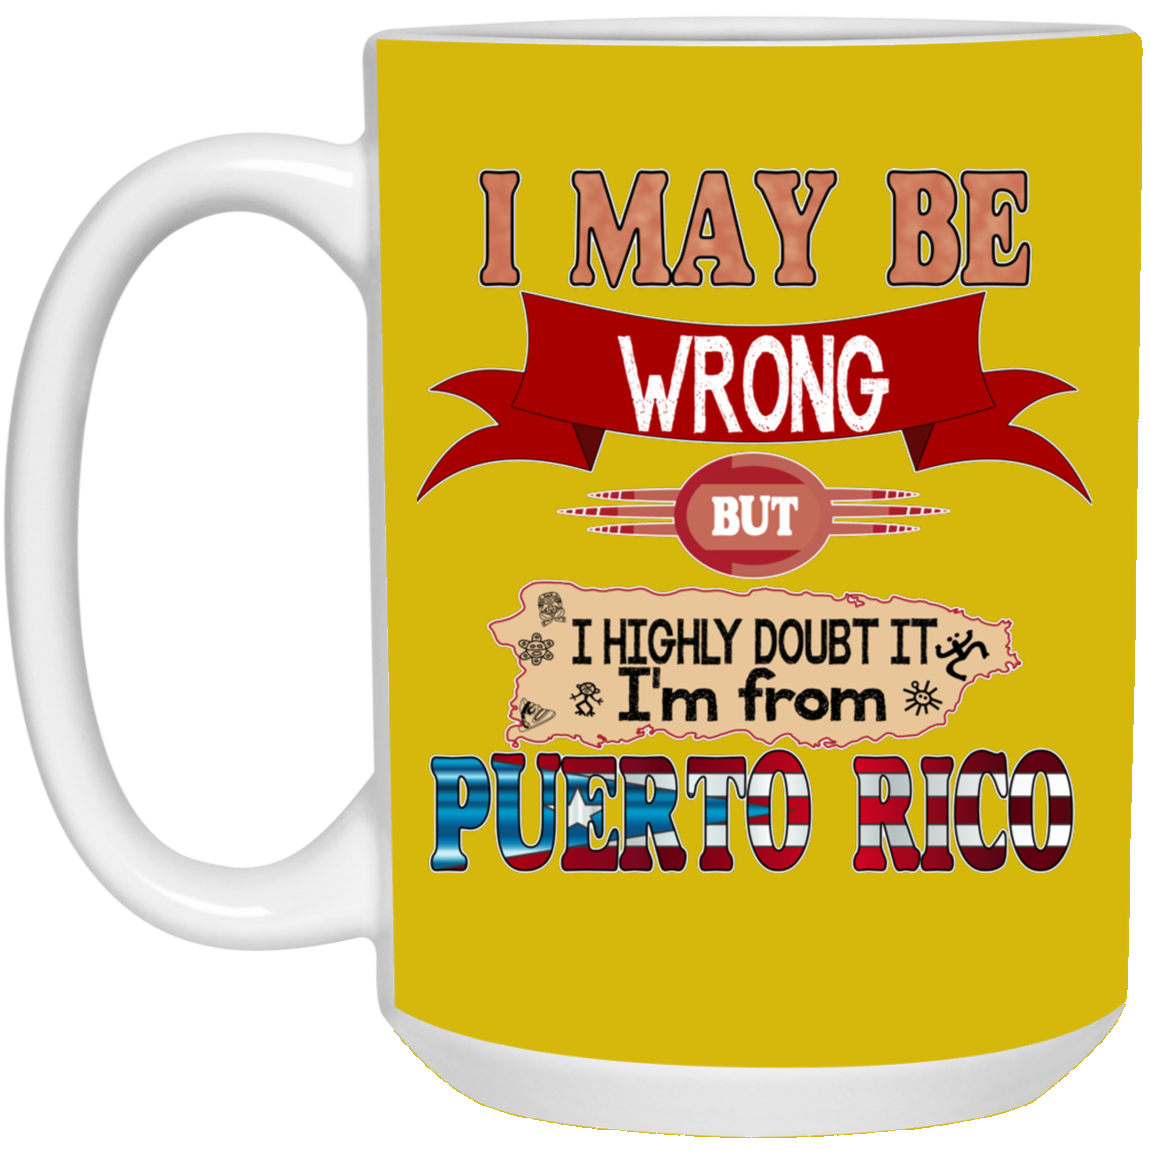 My Be Wrong But Doubt It - 15 oz. White Mug - Puerto Rican Pride